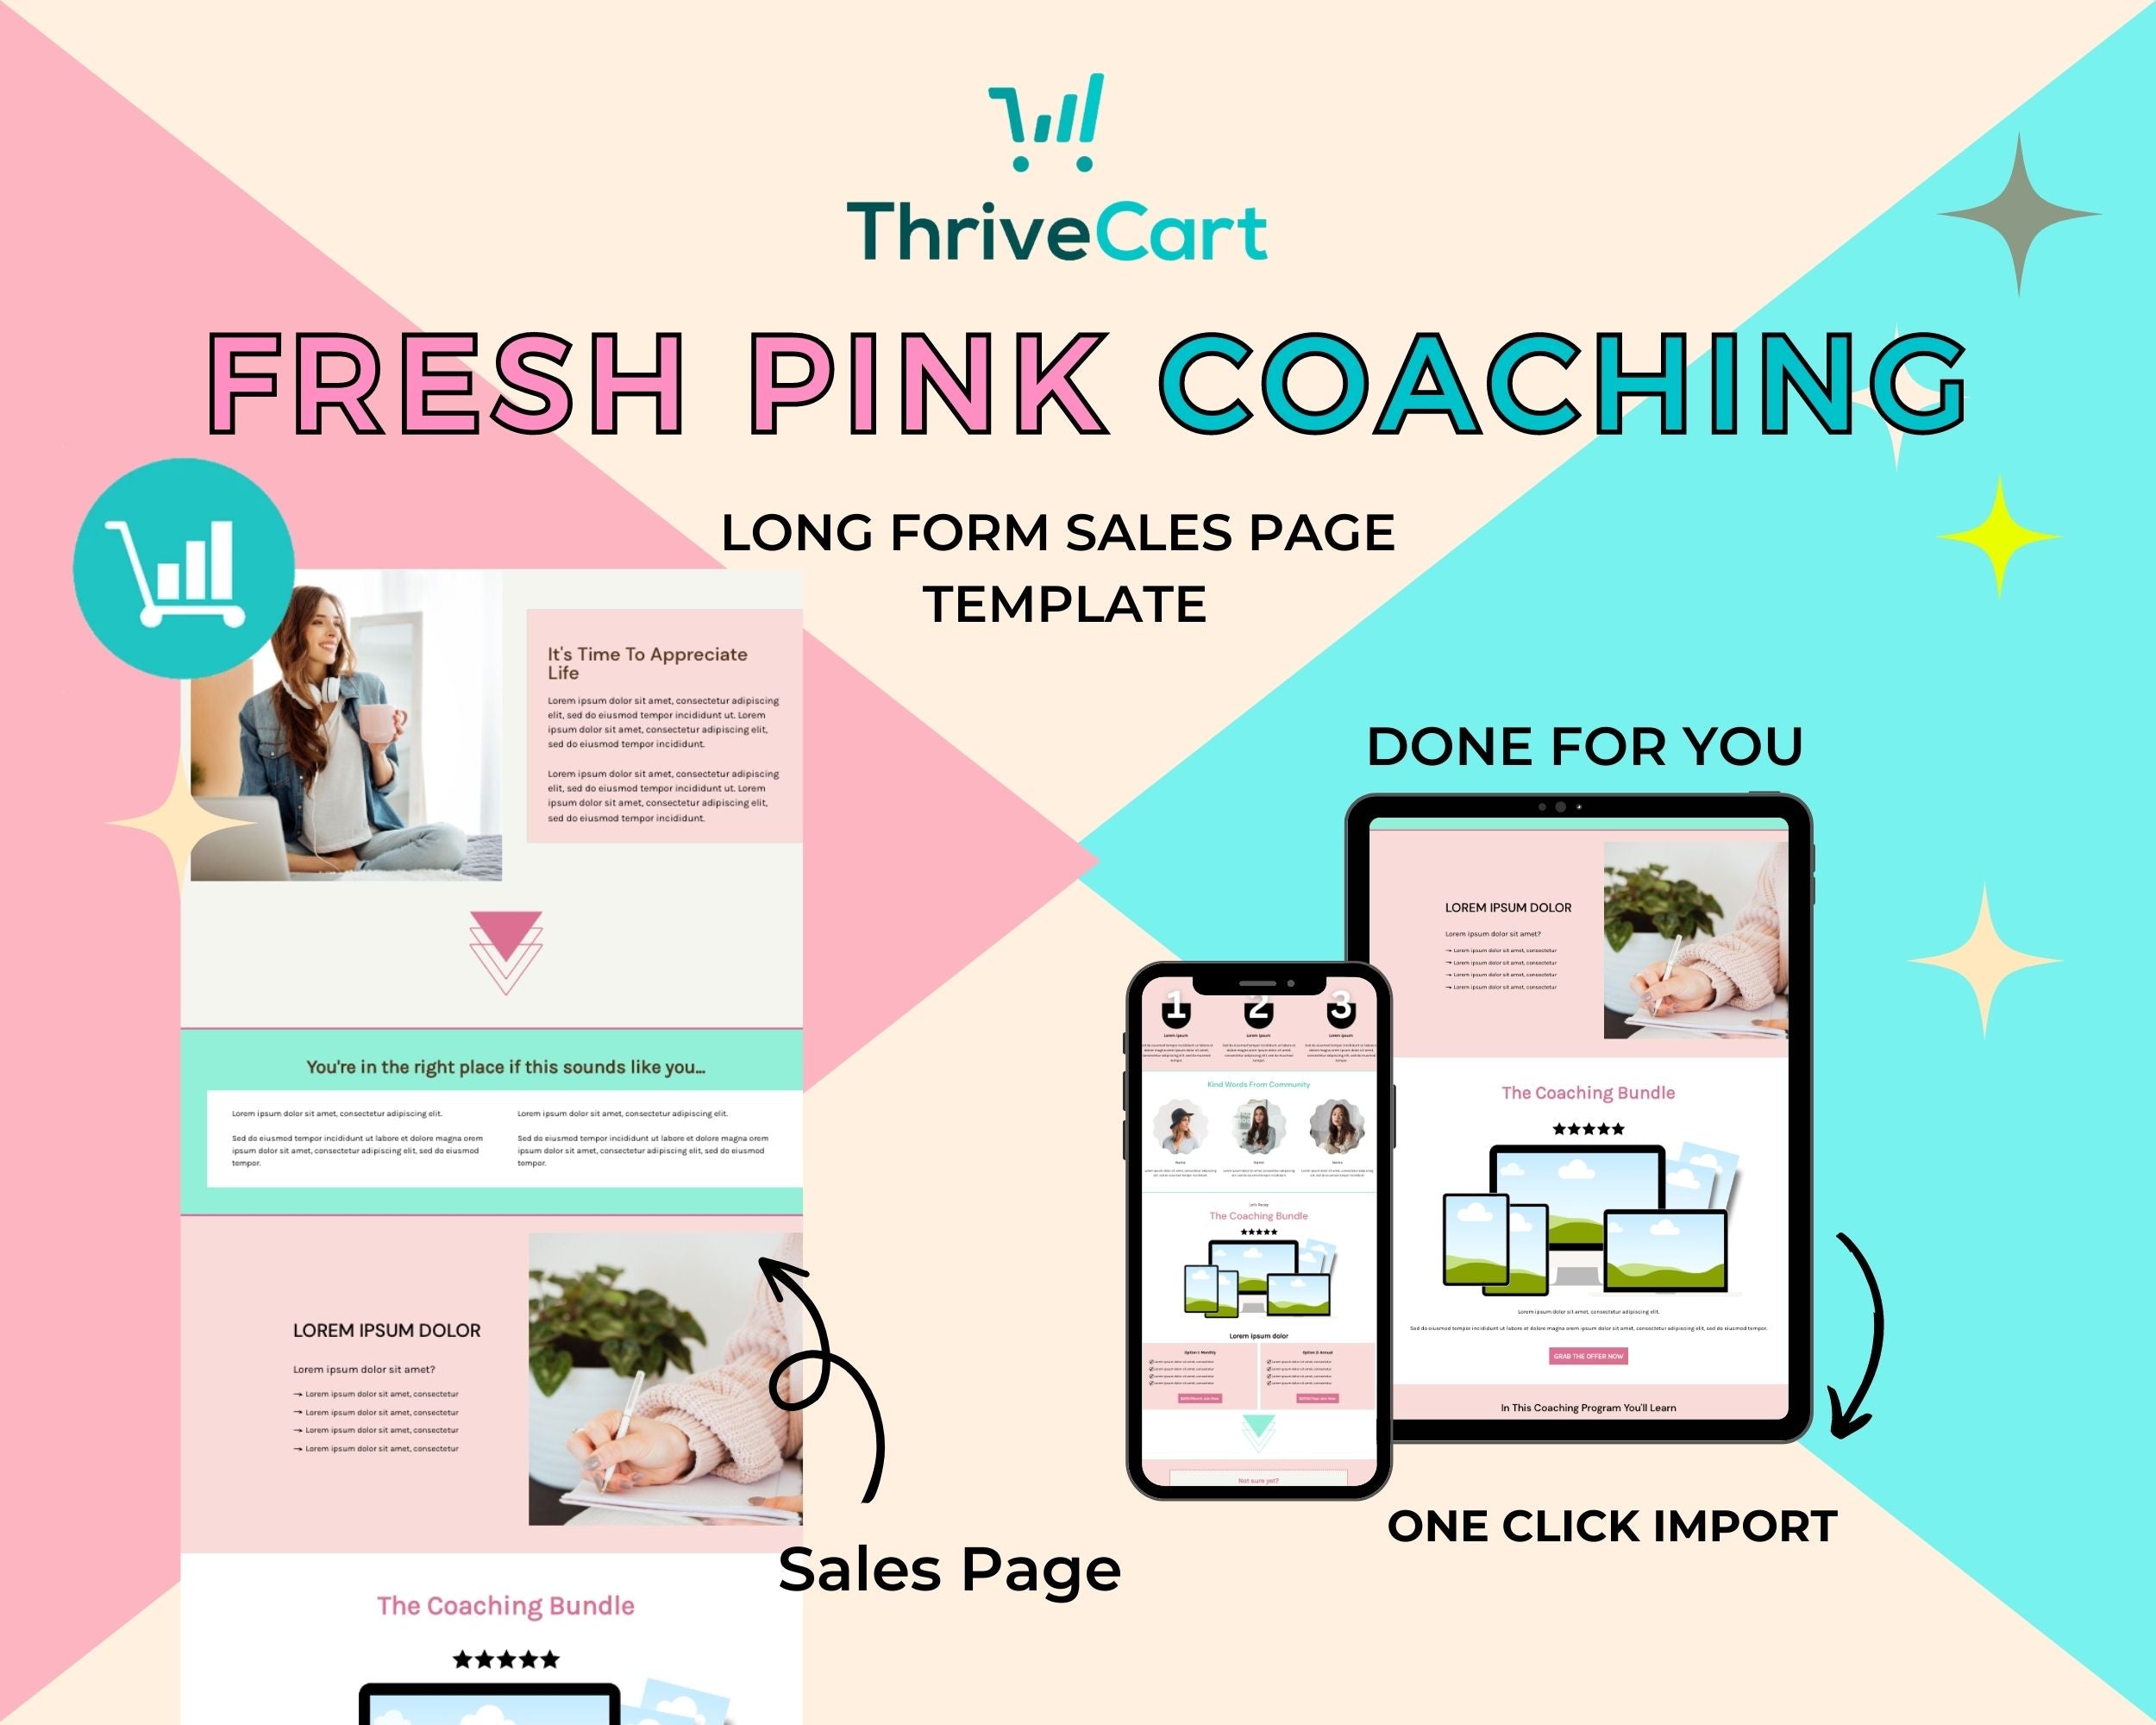 Fresh Pink Coaching Sales Page Template in Thrivecart